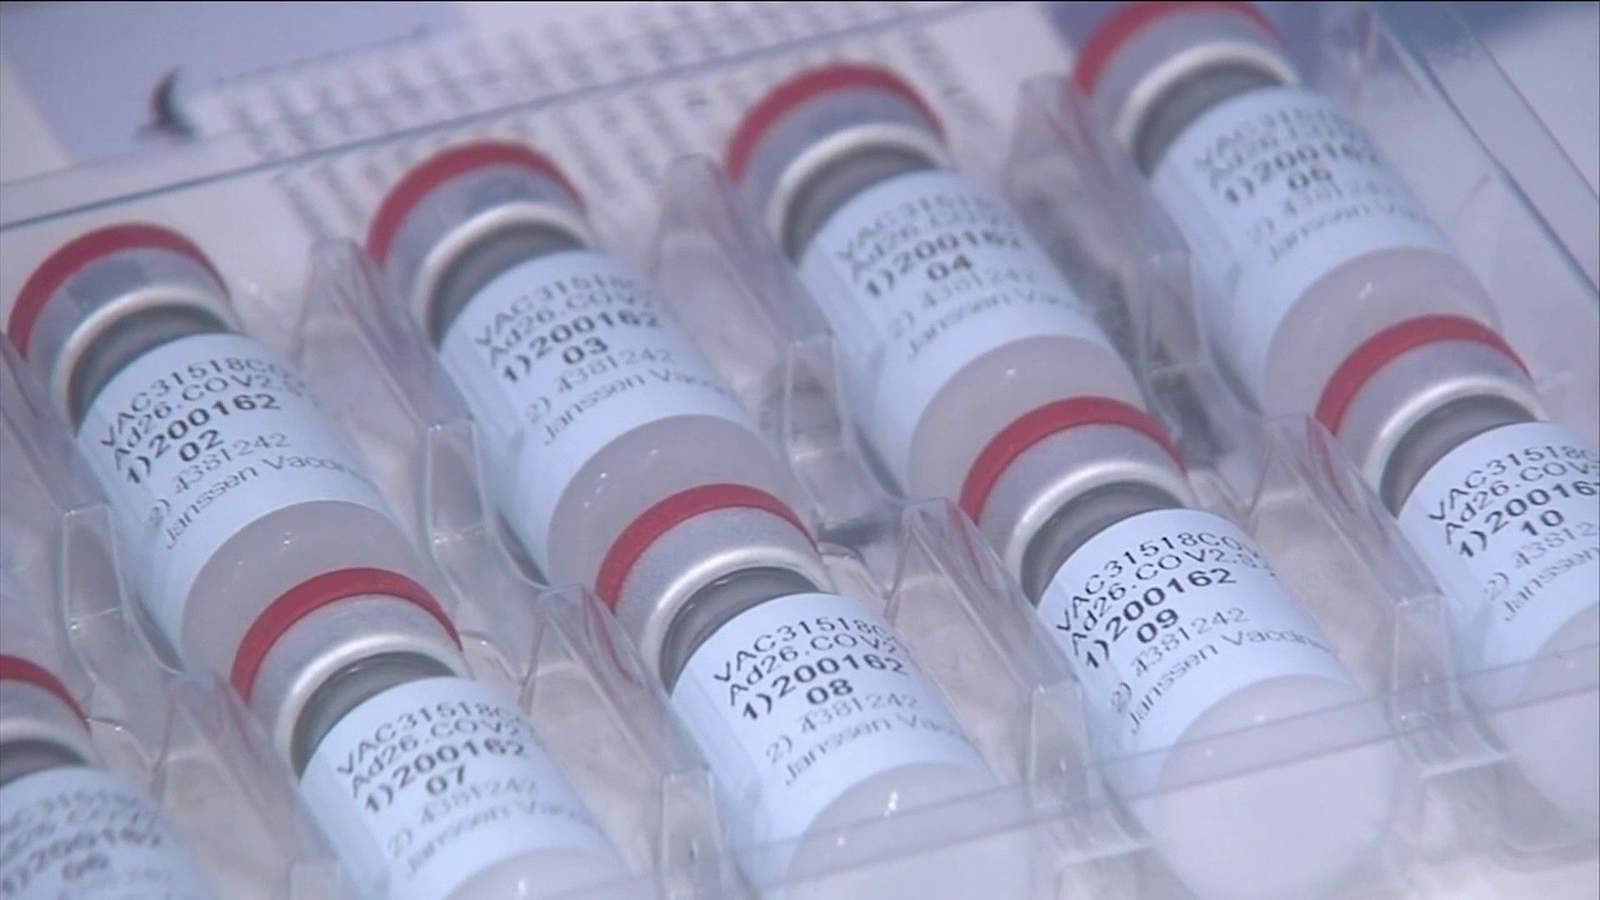 Johnson & Johnson pause won’t affect Houston’s supply of vaccines, city officials say